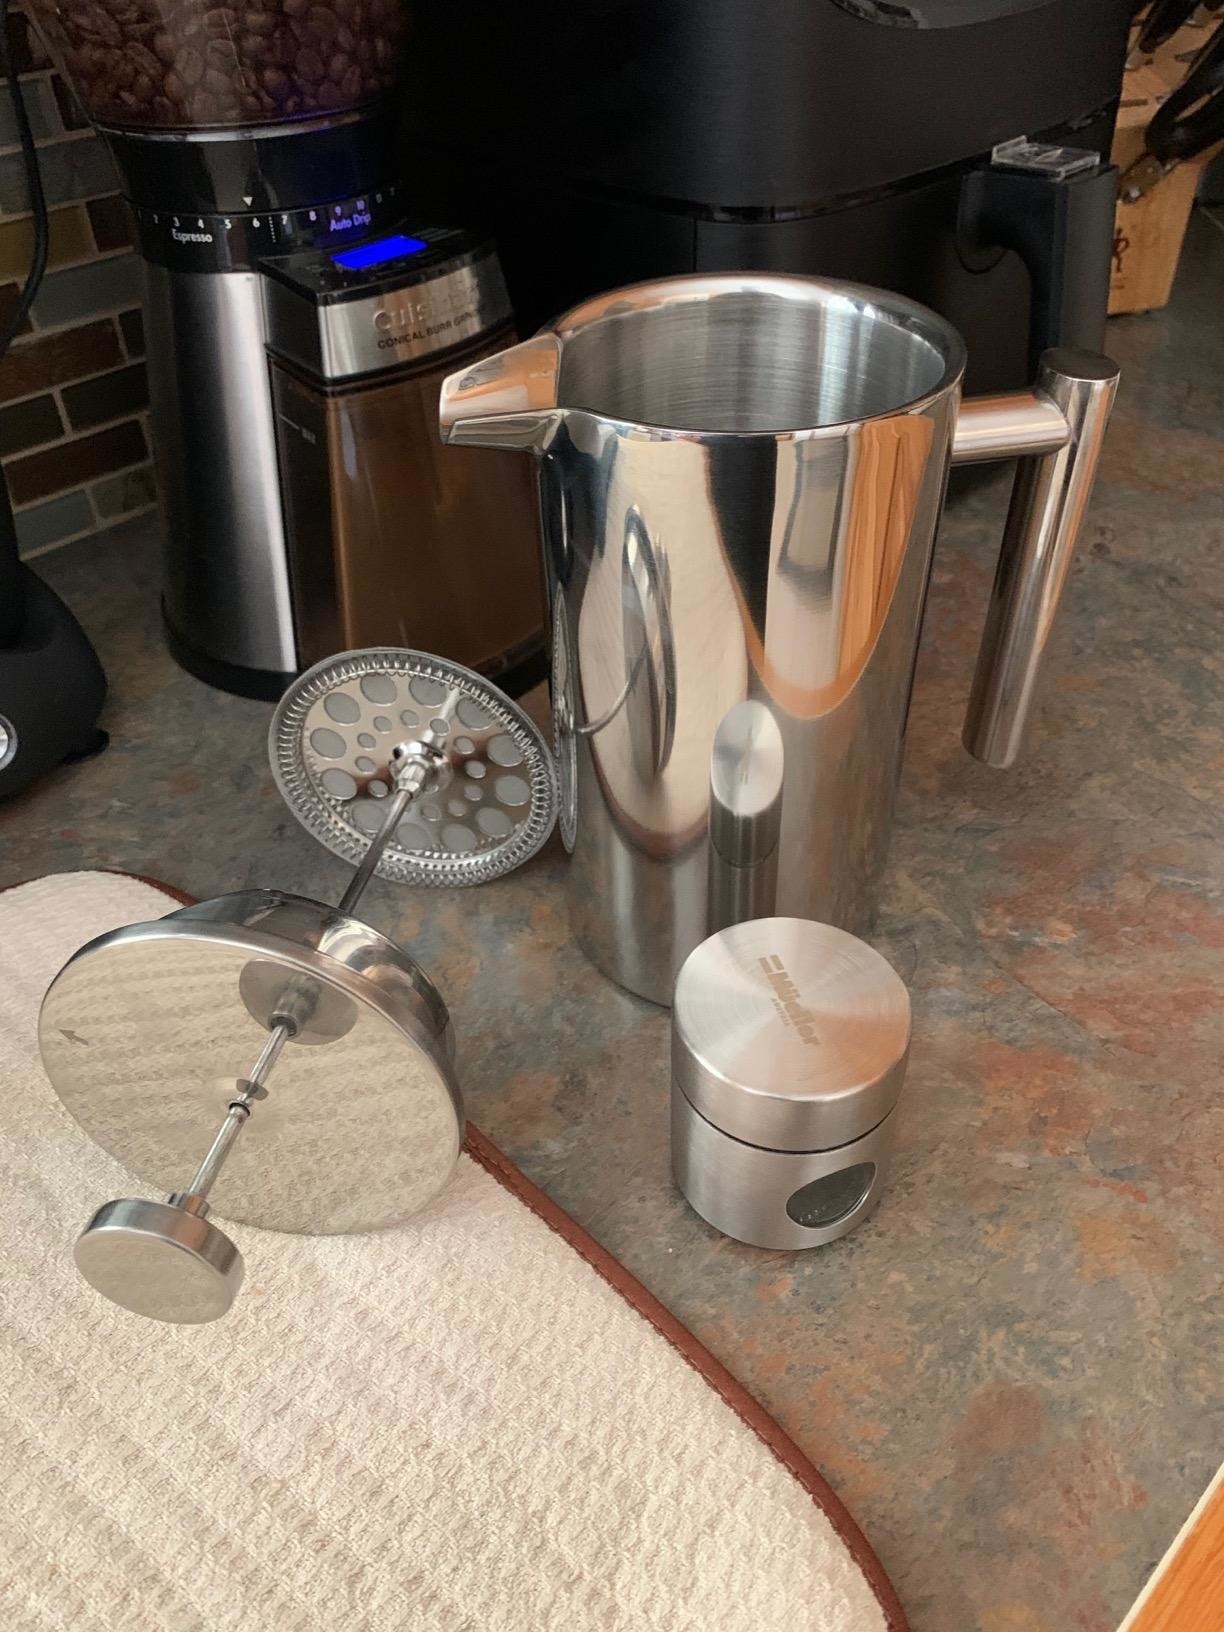 The silver-colored French Press with the stopper out.